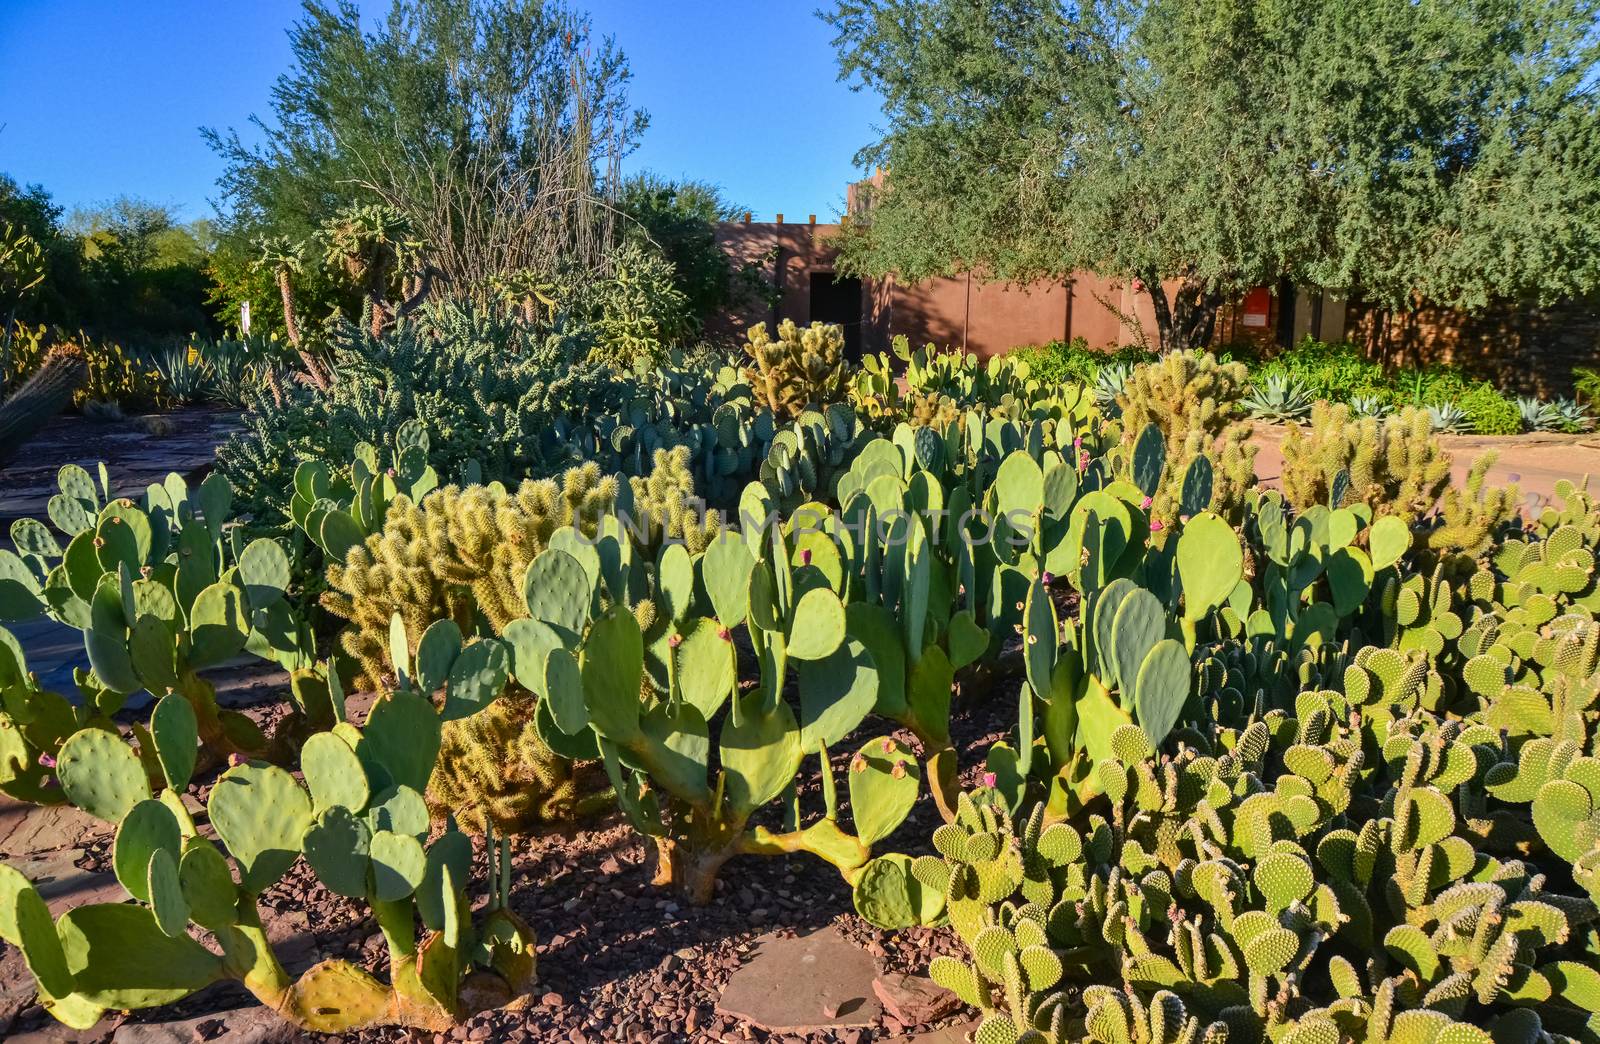 Different types of prickly pear cacti in a botanical garden in P by Hydrobiolog